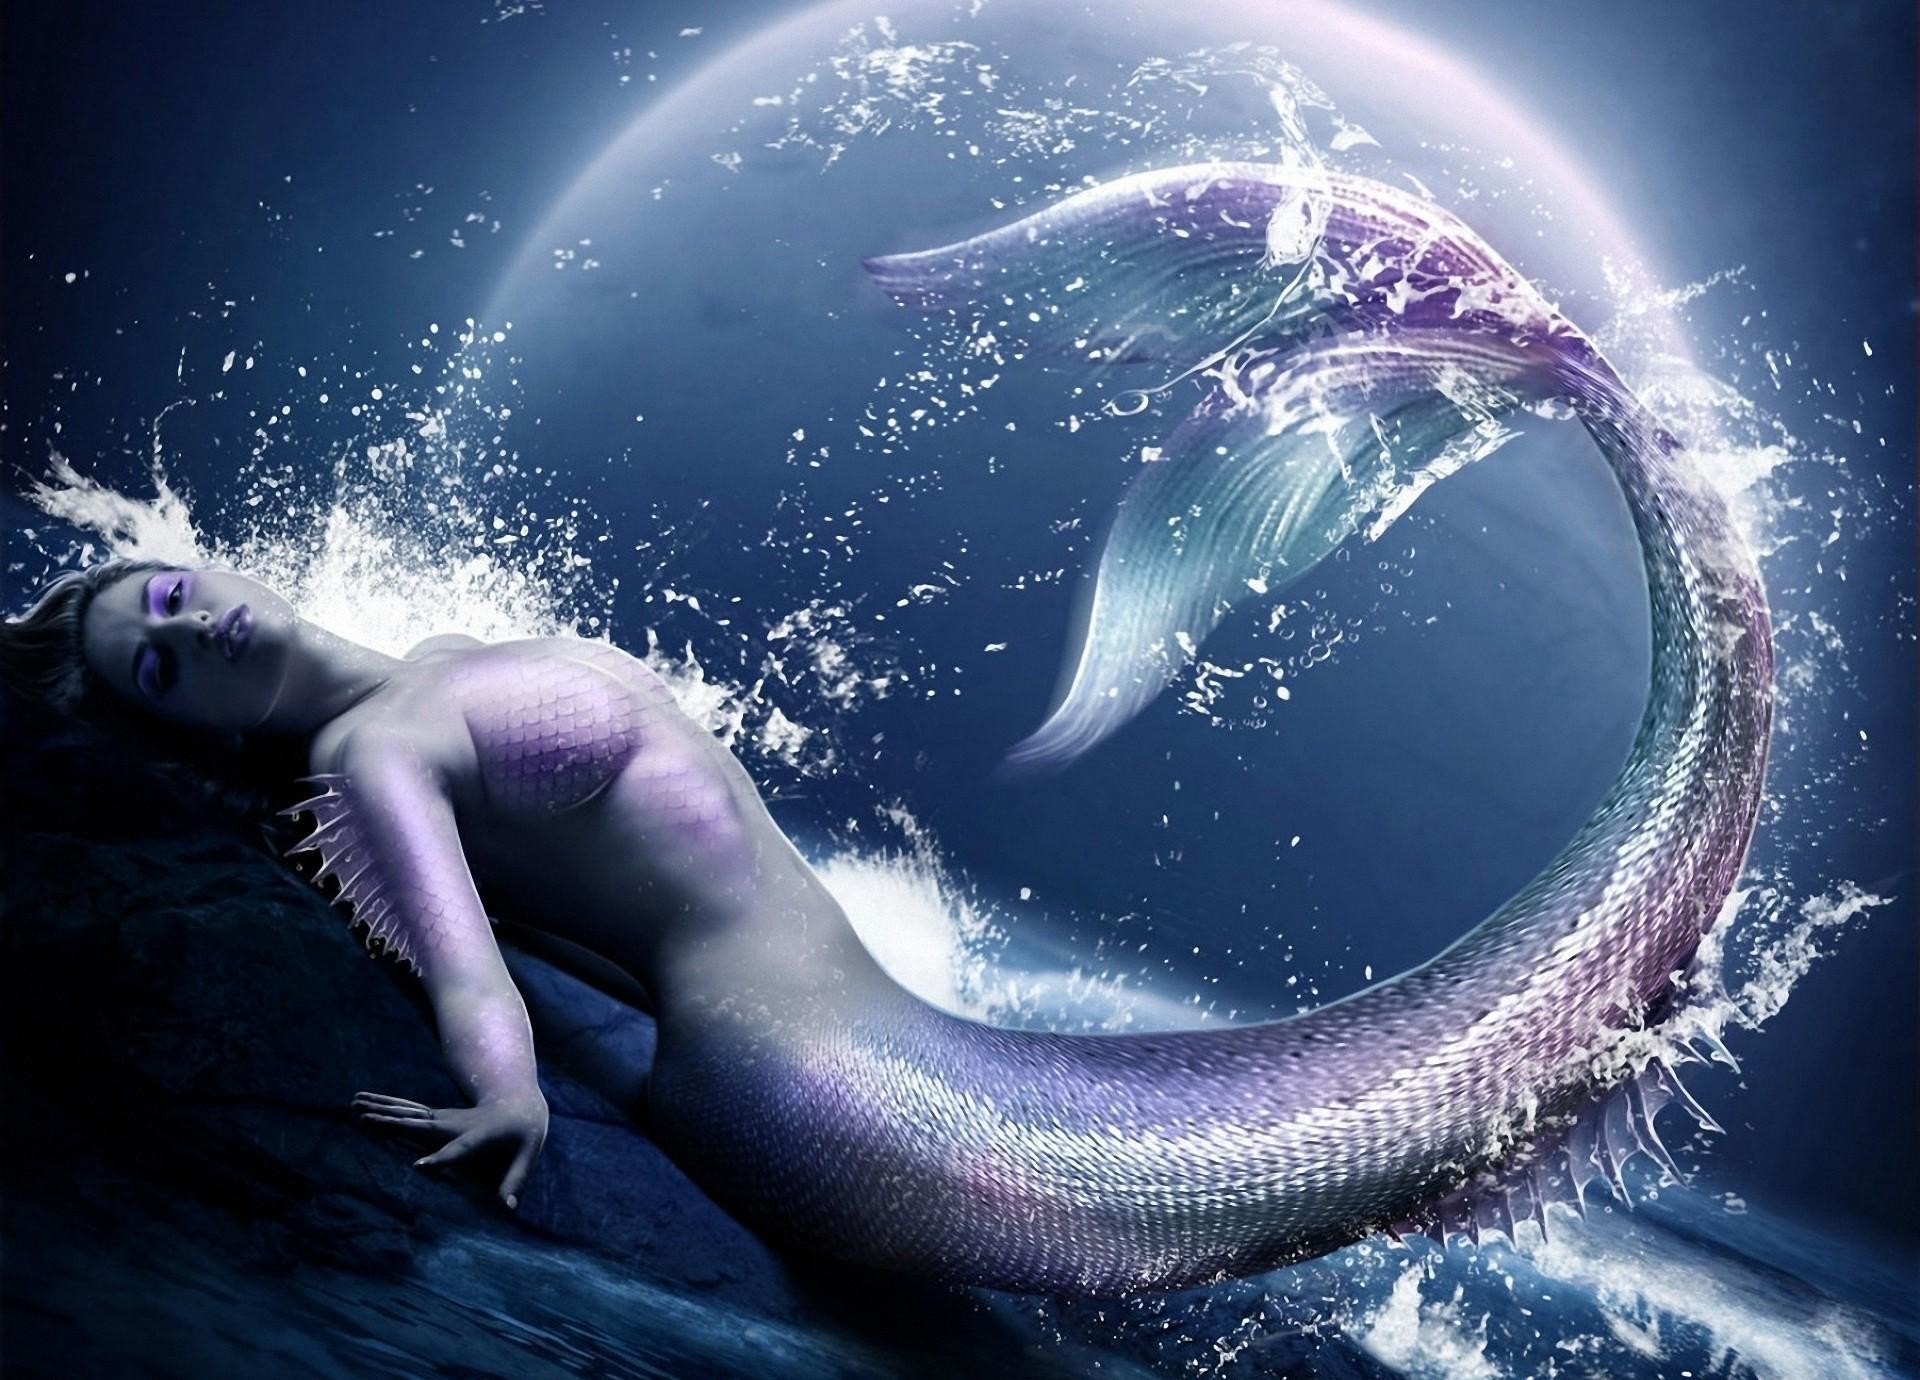 1920x1380 The Little Mermaid HD Wallpapers Backgrounds Wallpaper Mermaid Wallpaper